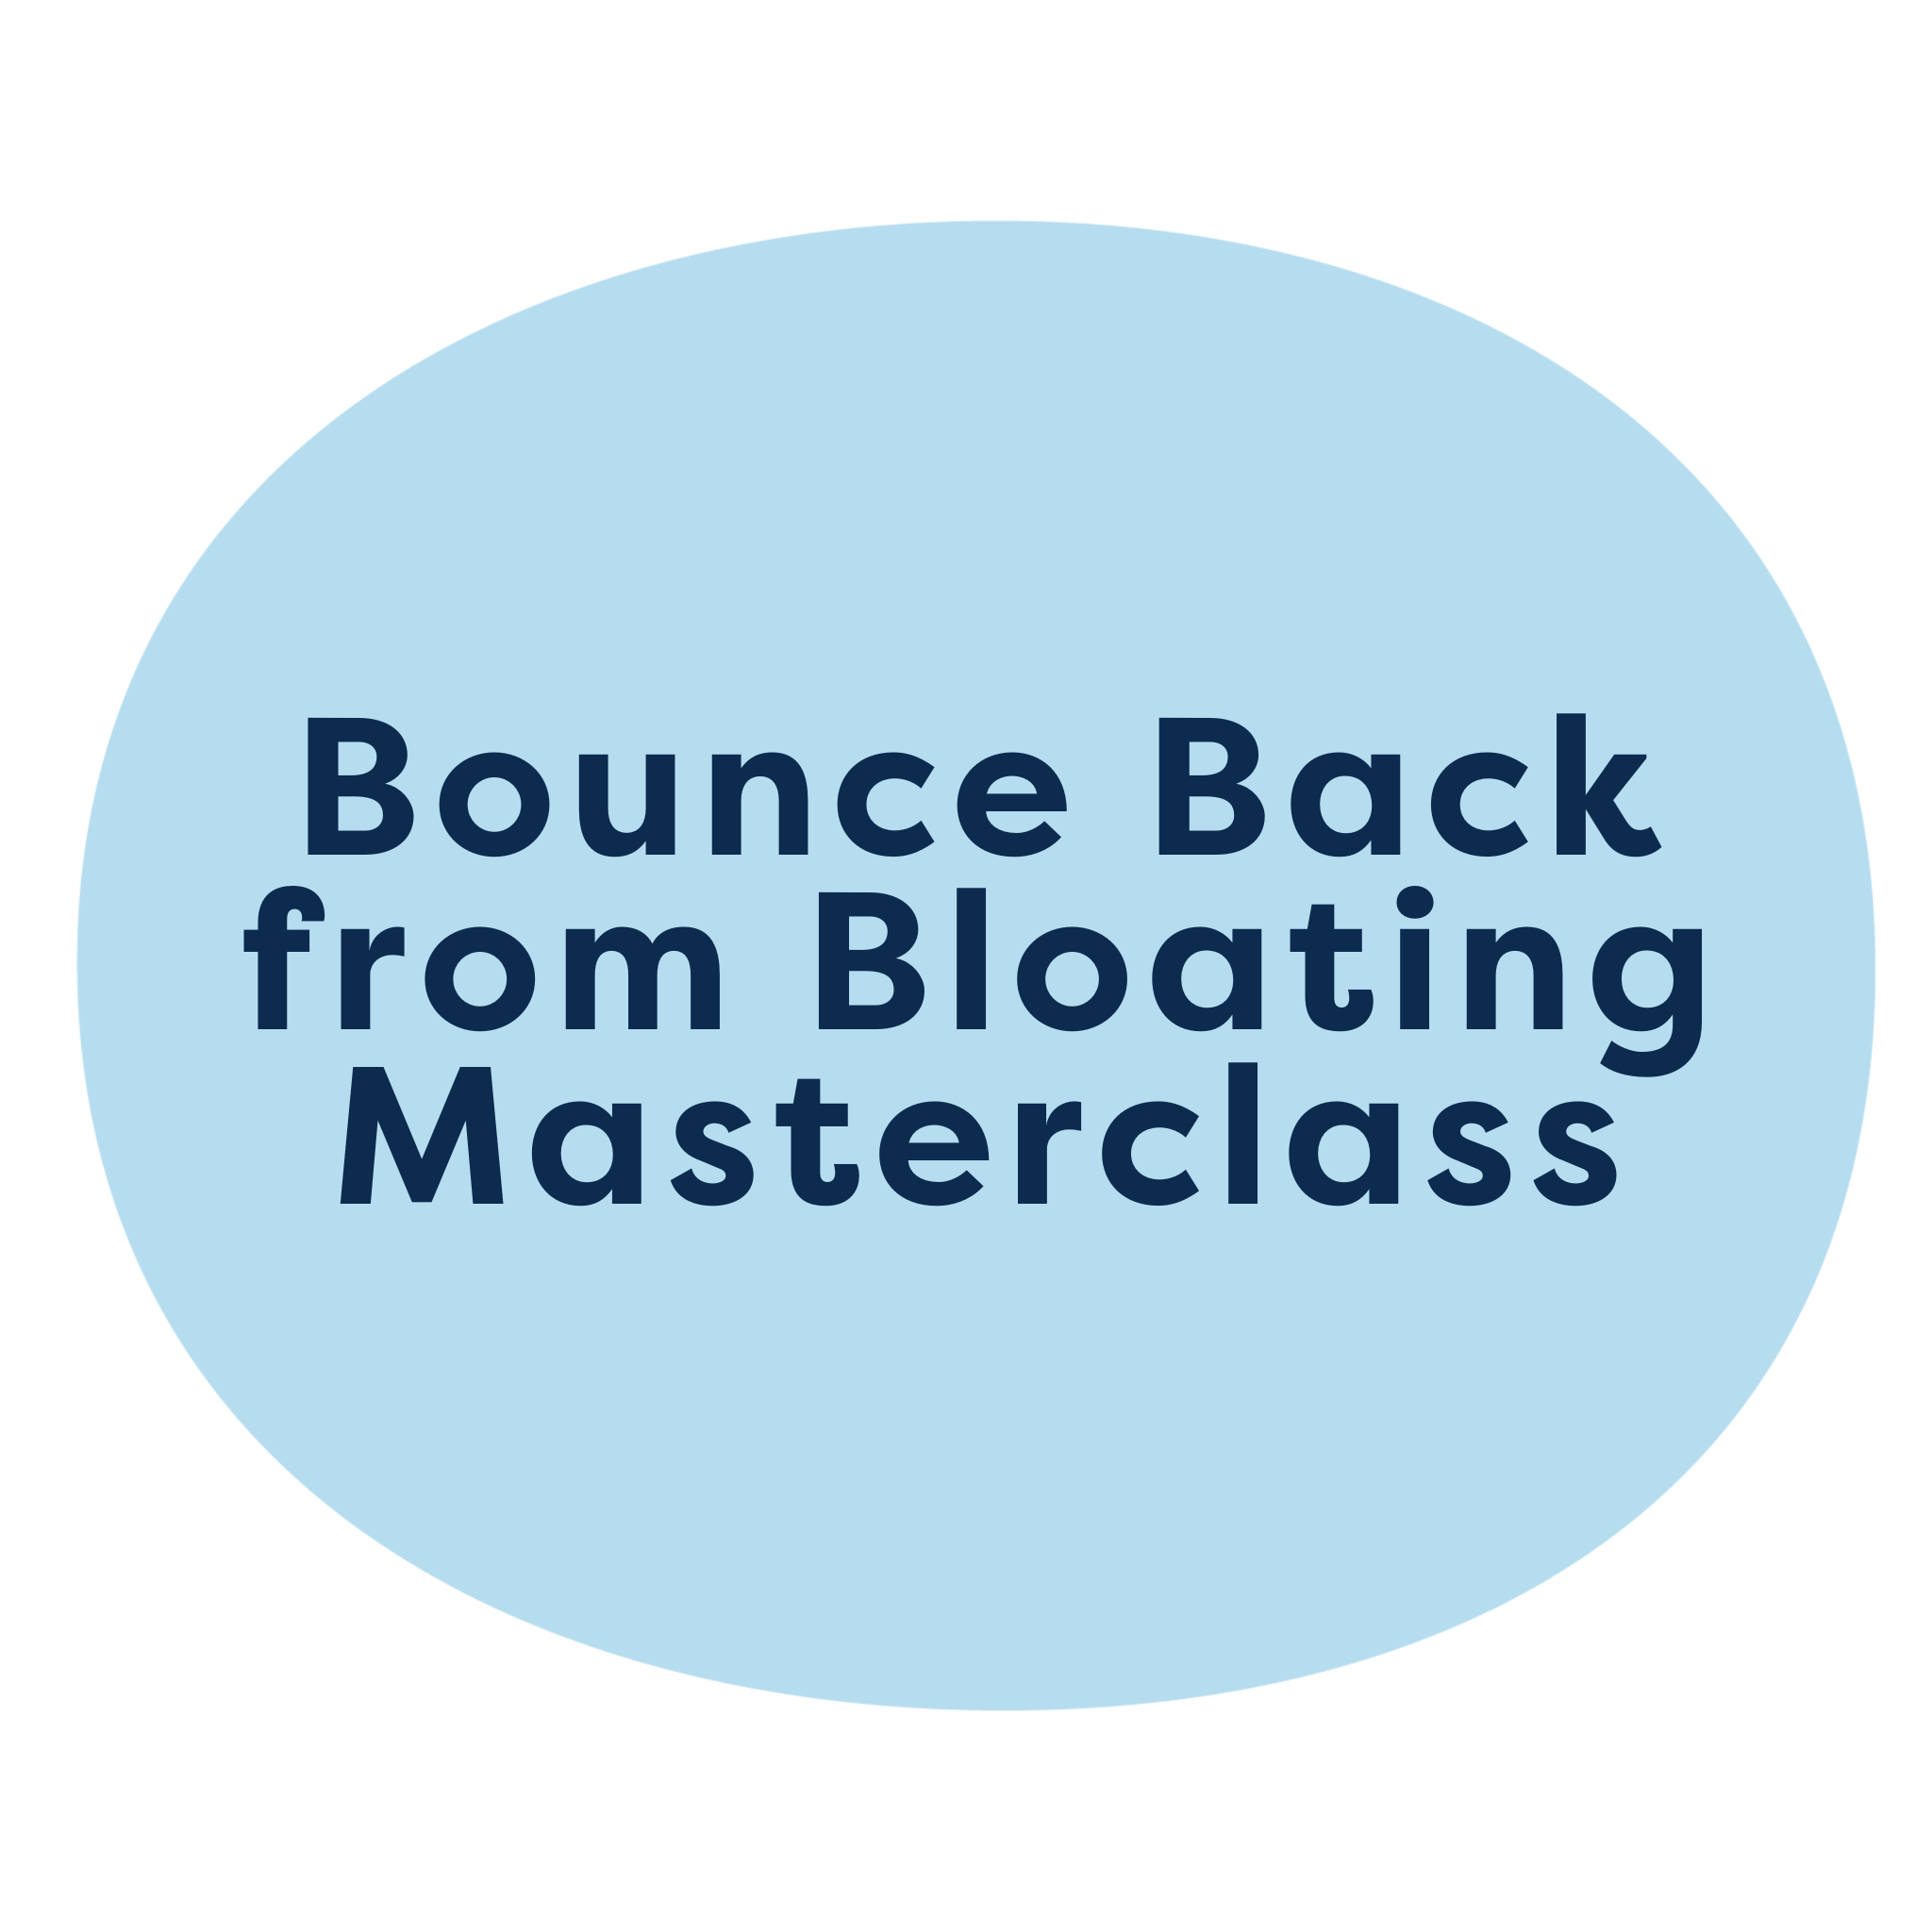 Bounce Back from Bloating Masterclass